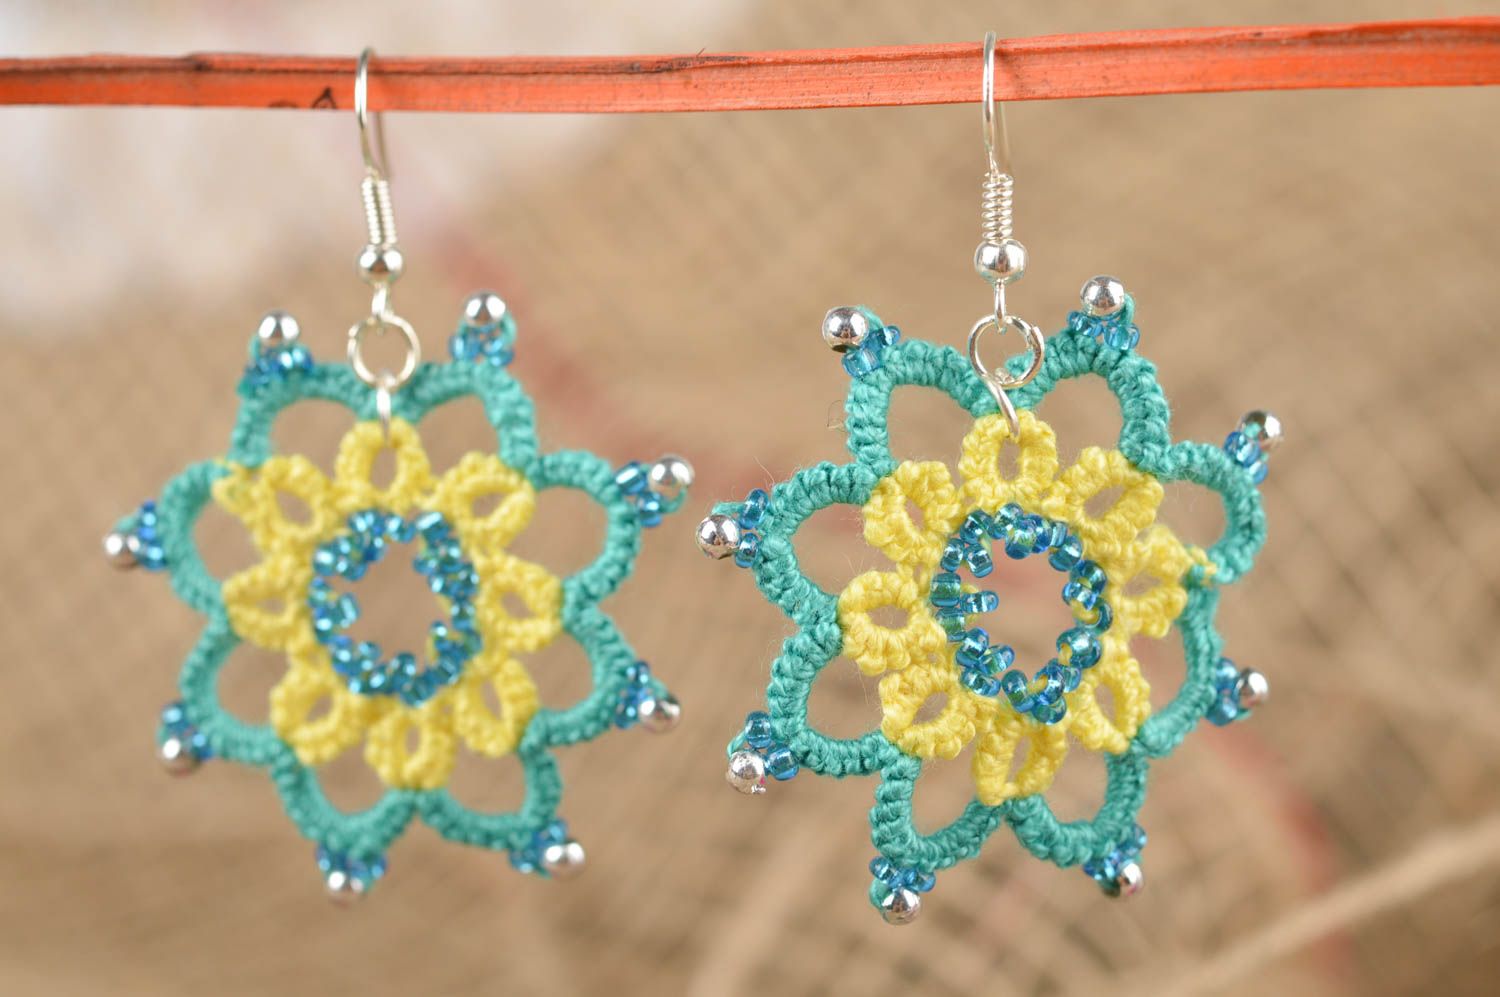 Beautiful handmade woven lace earrings textile earrings with beads gifts for her photo 1